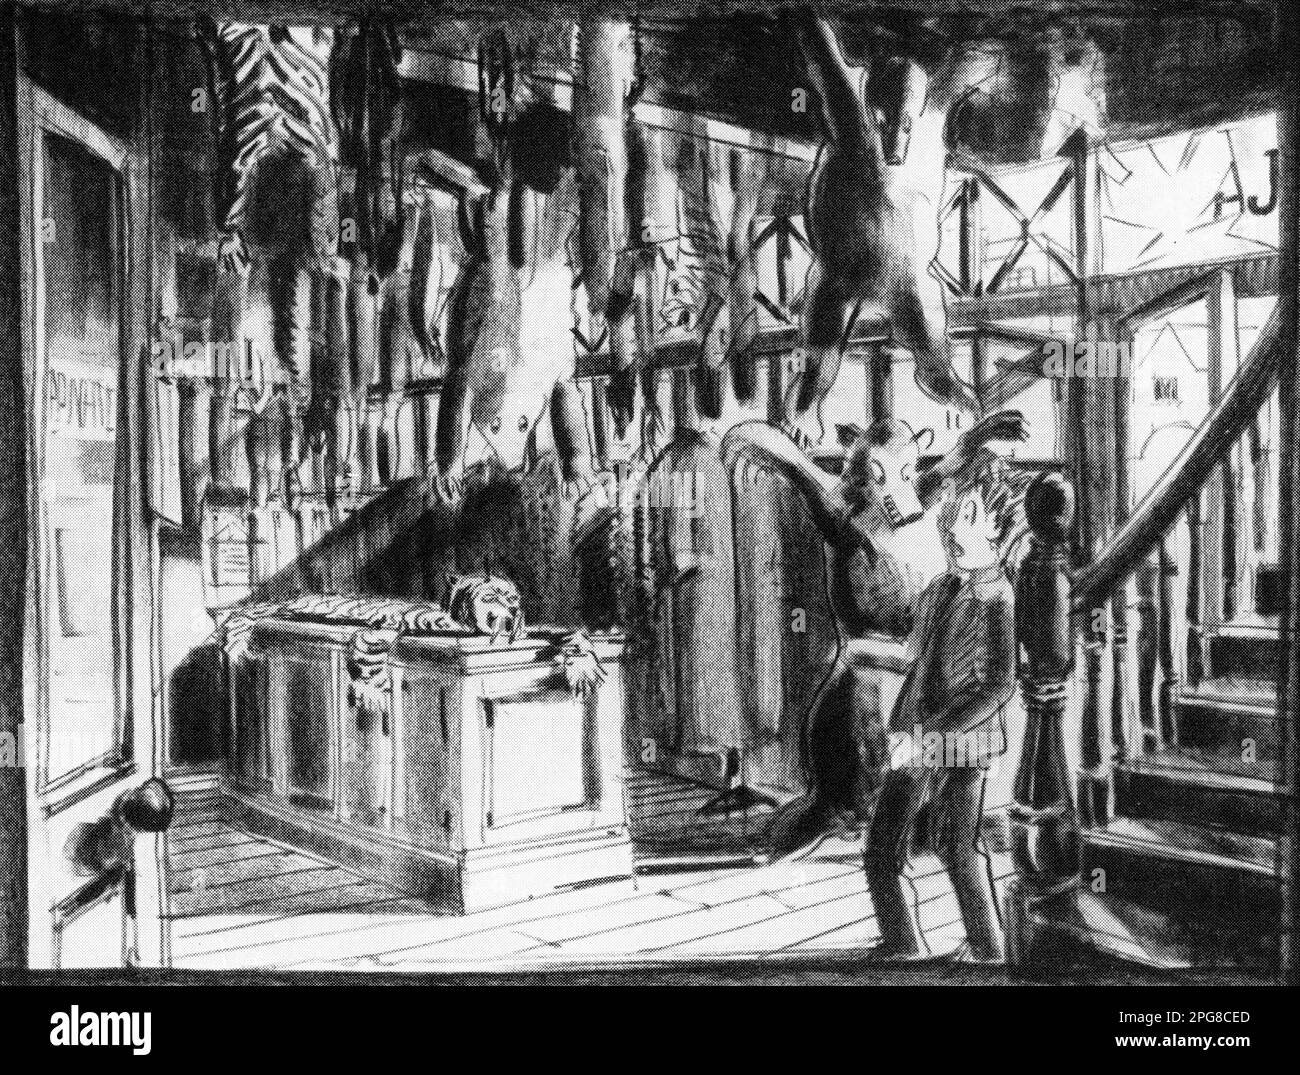 Concept Art / Set Design by Art Director NORMAN ARNOLD for the film ALASTAIR SIM JACK WARNER and HARRY FOWLER in HUE AND CRY 1947 director CHARLES CRIGHTON writer T.E.B. Clarke music Georges Auric producer Michael Balcon Ealing Sudios / General Film Distributors (GFD) Stock Photo